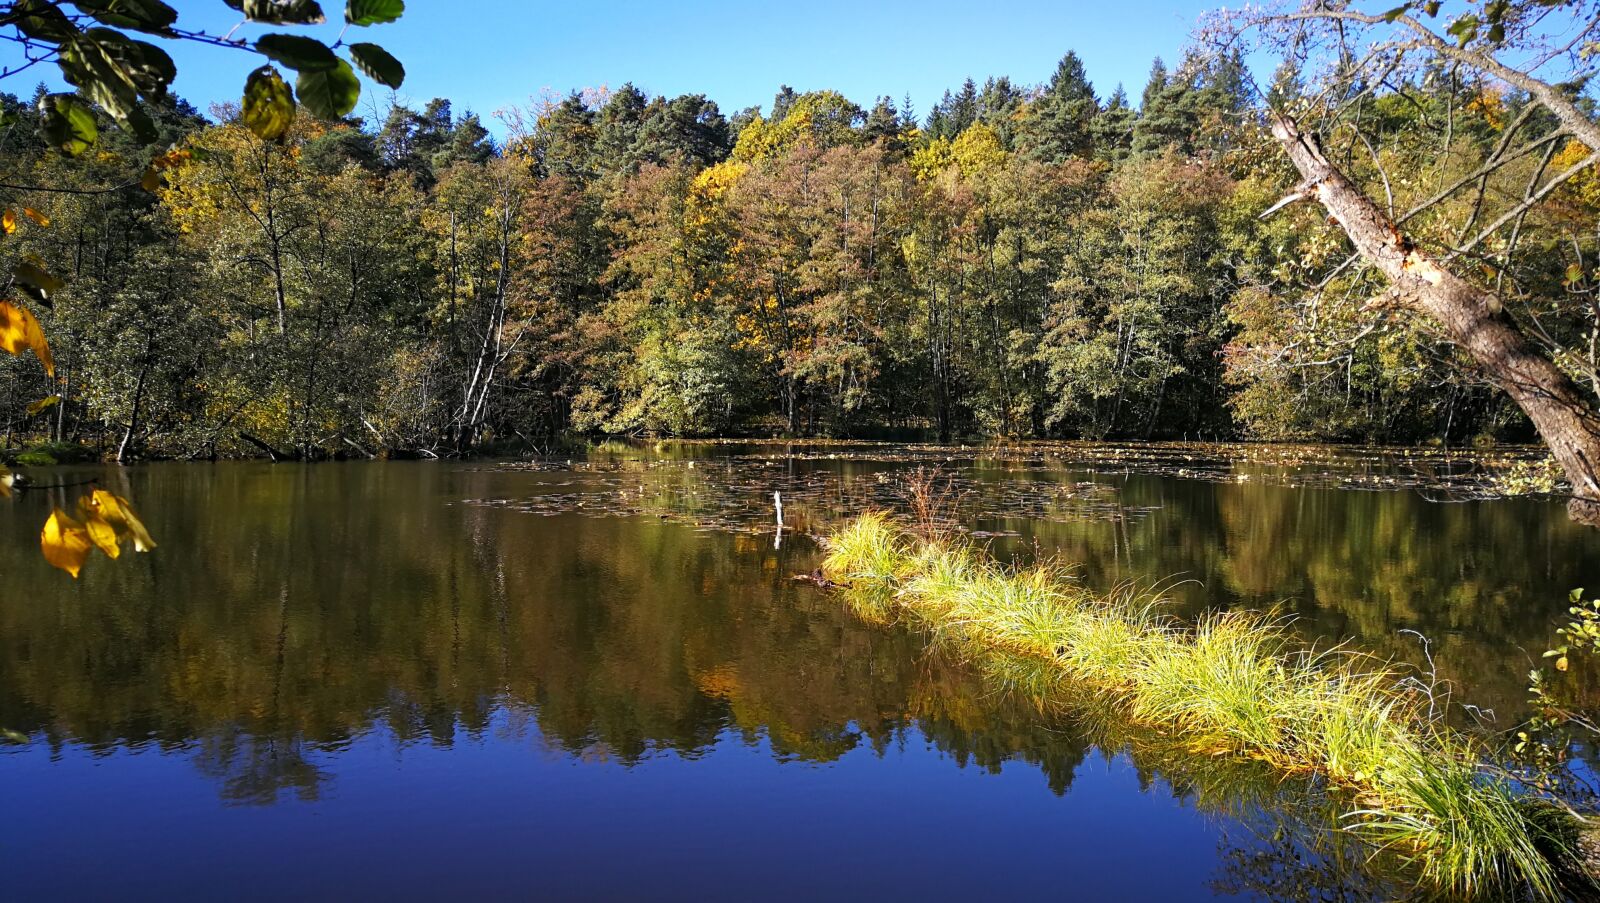 HUAWEI P10 Plus sample photo. Autumn, forest, lake photography